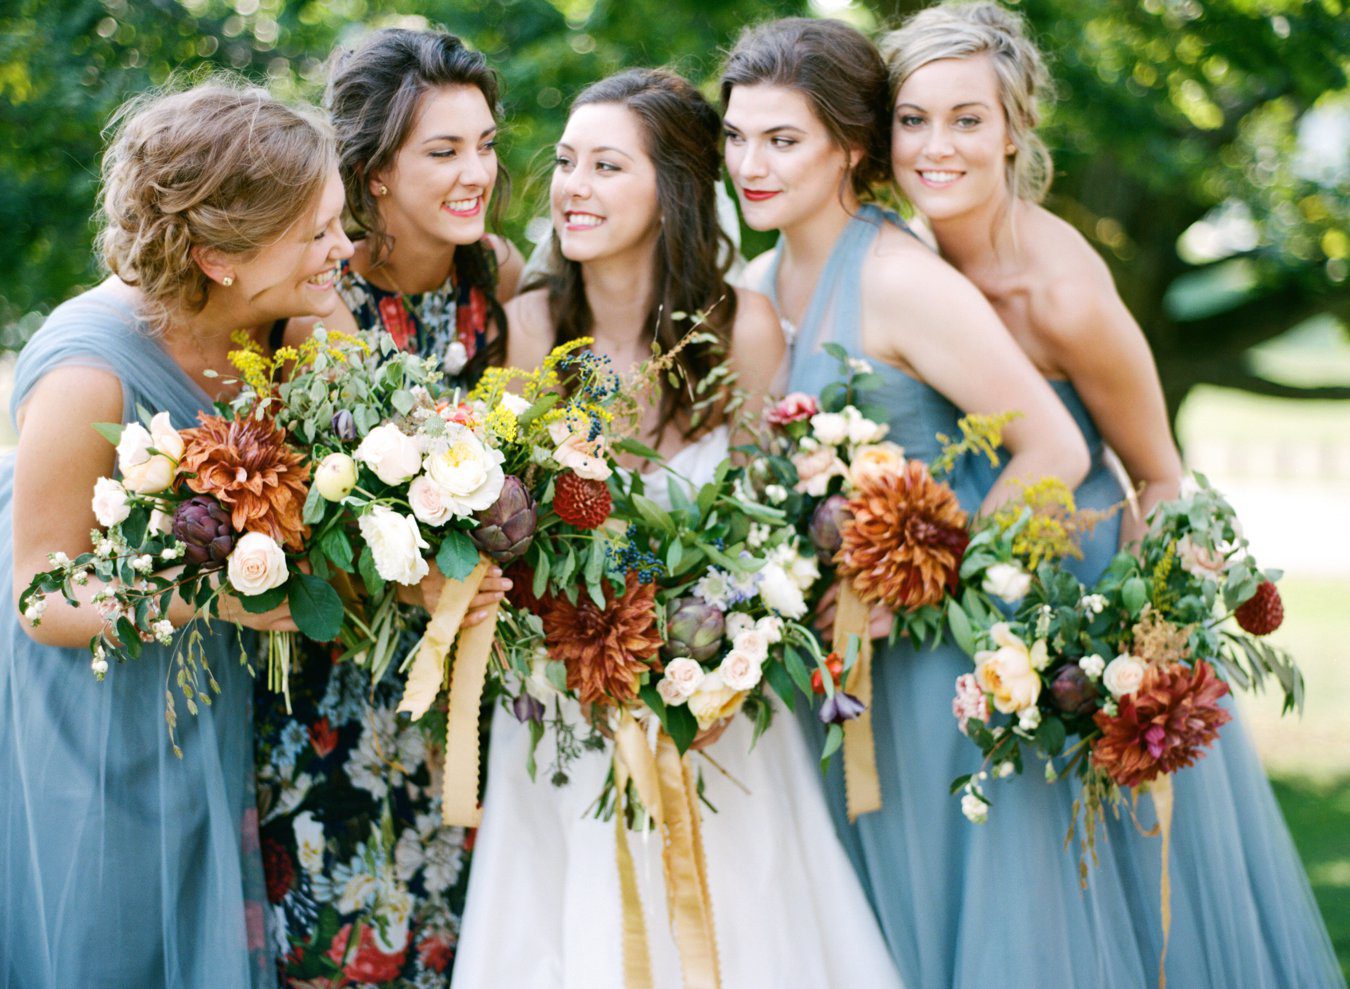 Jenny Yoo Dusty Blue bridesmaids dresses | The Day's Design Floral | Holland Michiagn Wedding | The Felt Mansion Holland Michigan Wedding Ceremony | Cory Weber Photography 